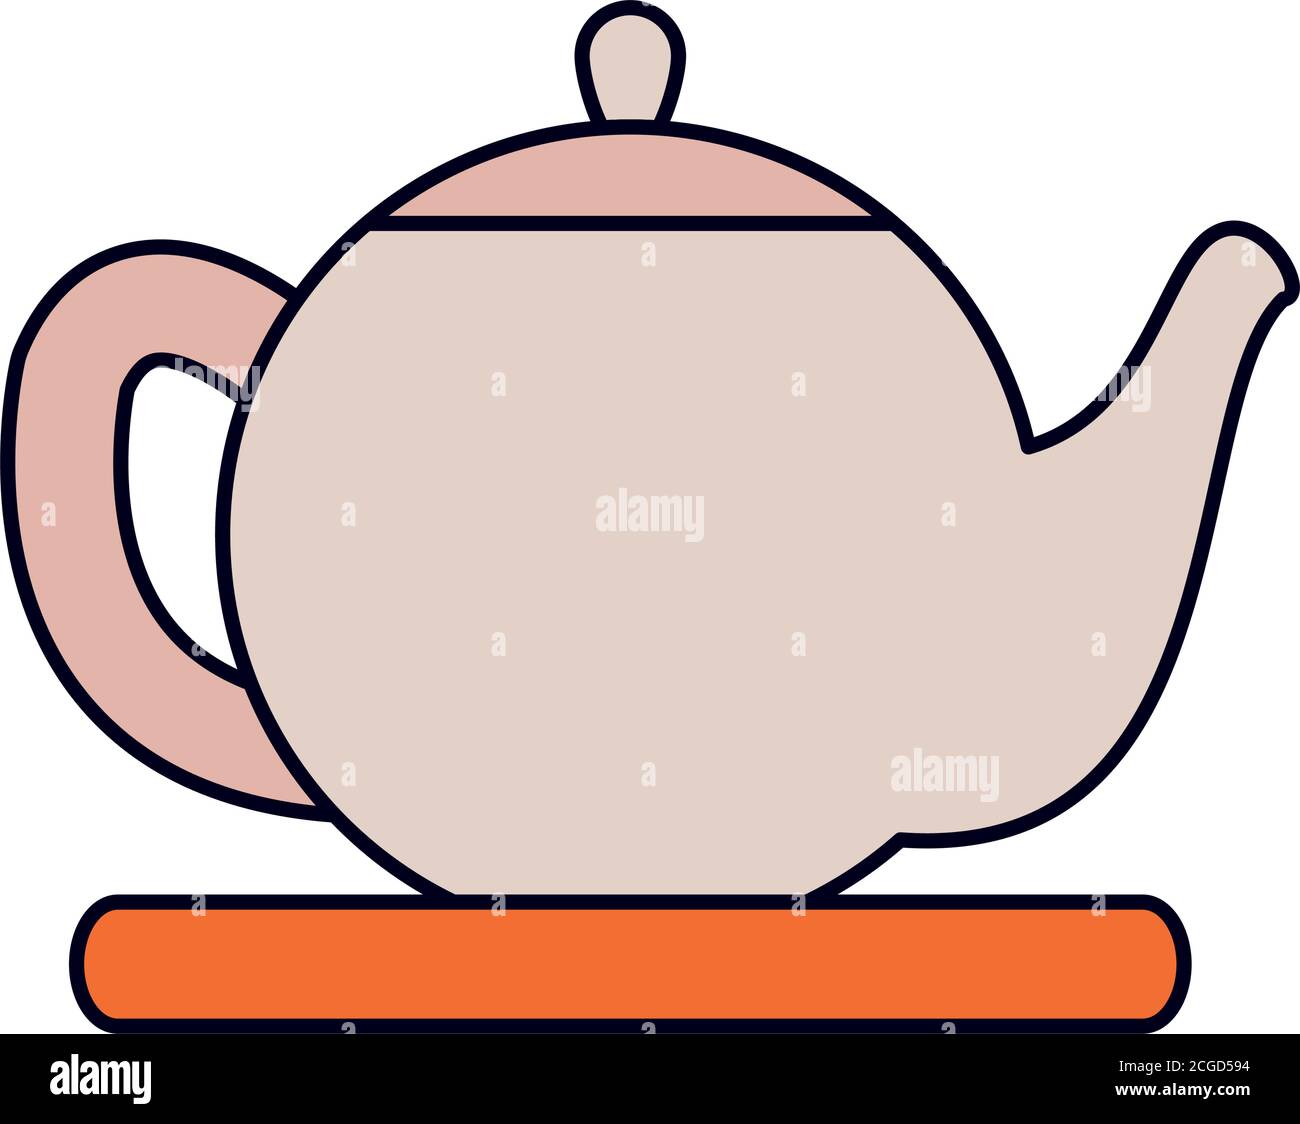 Royal Teapot Cut Out Stock Images & Pictures - Alamy